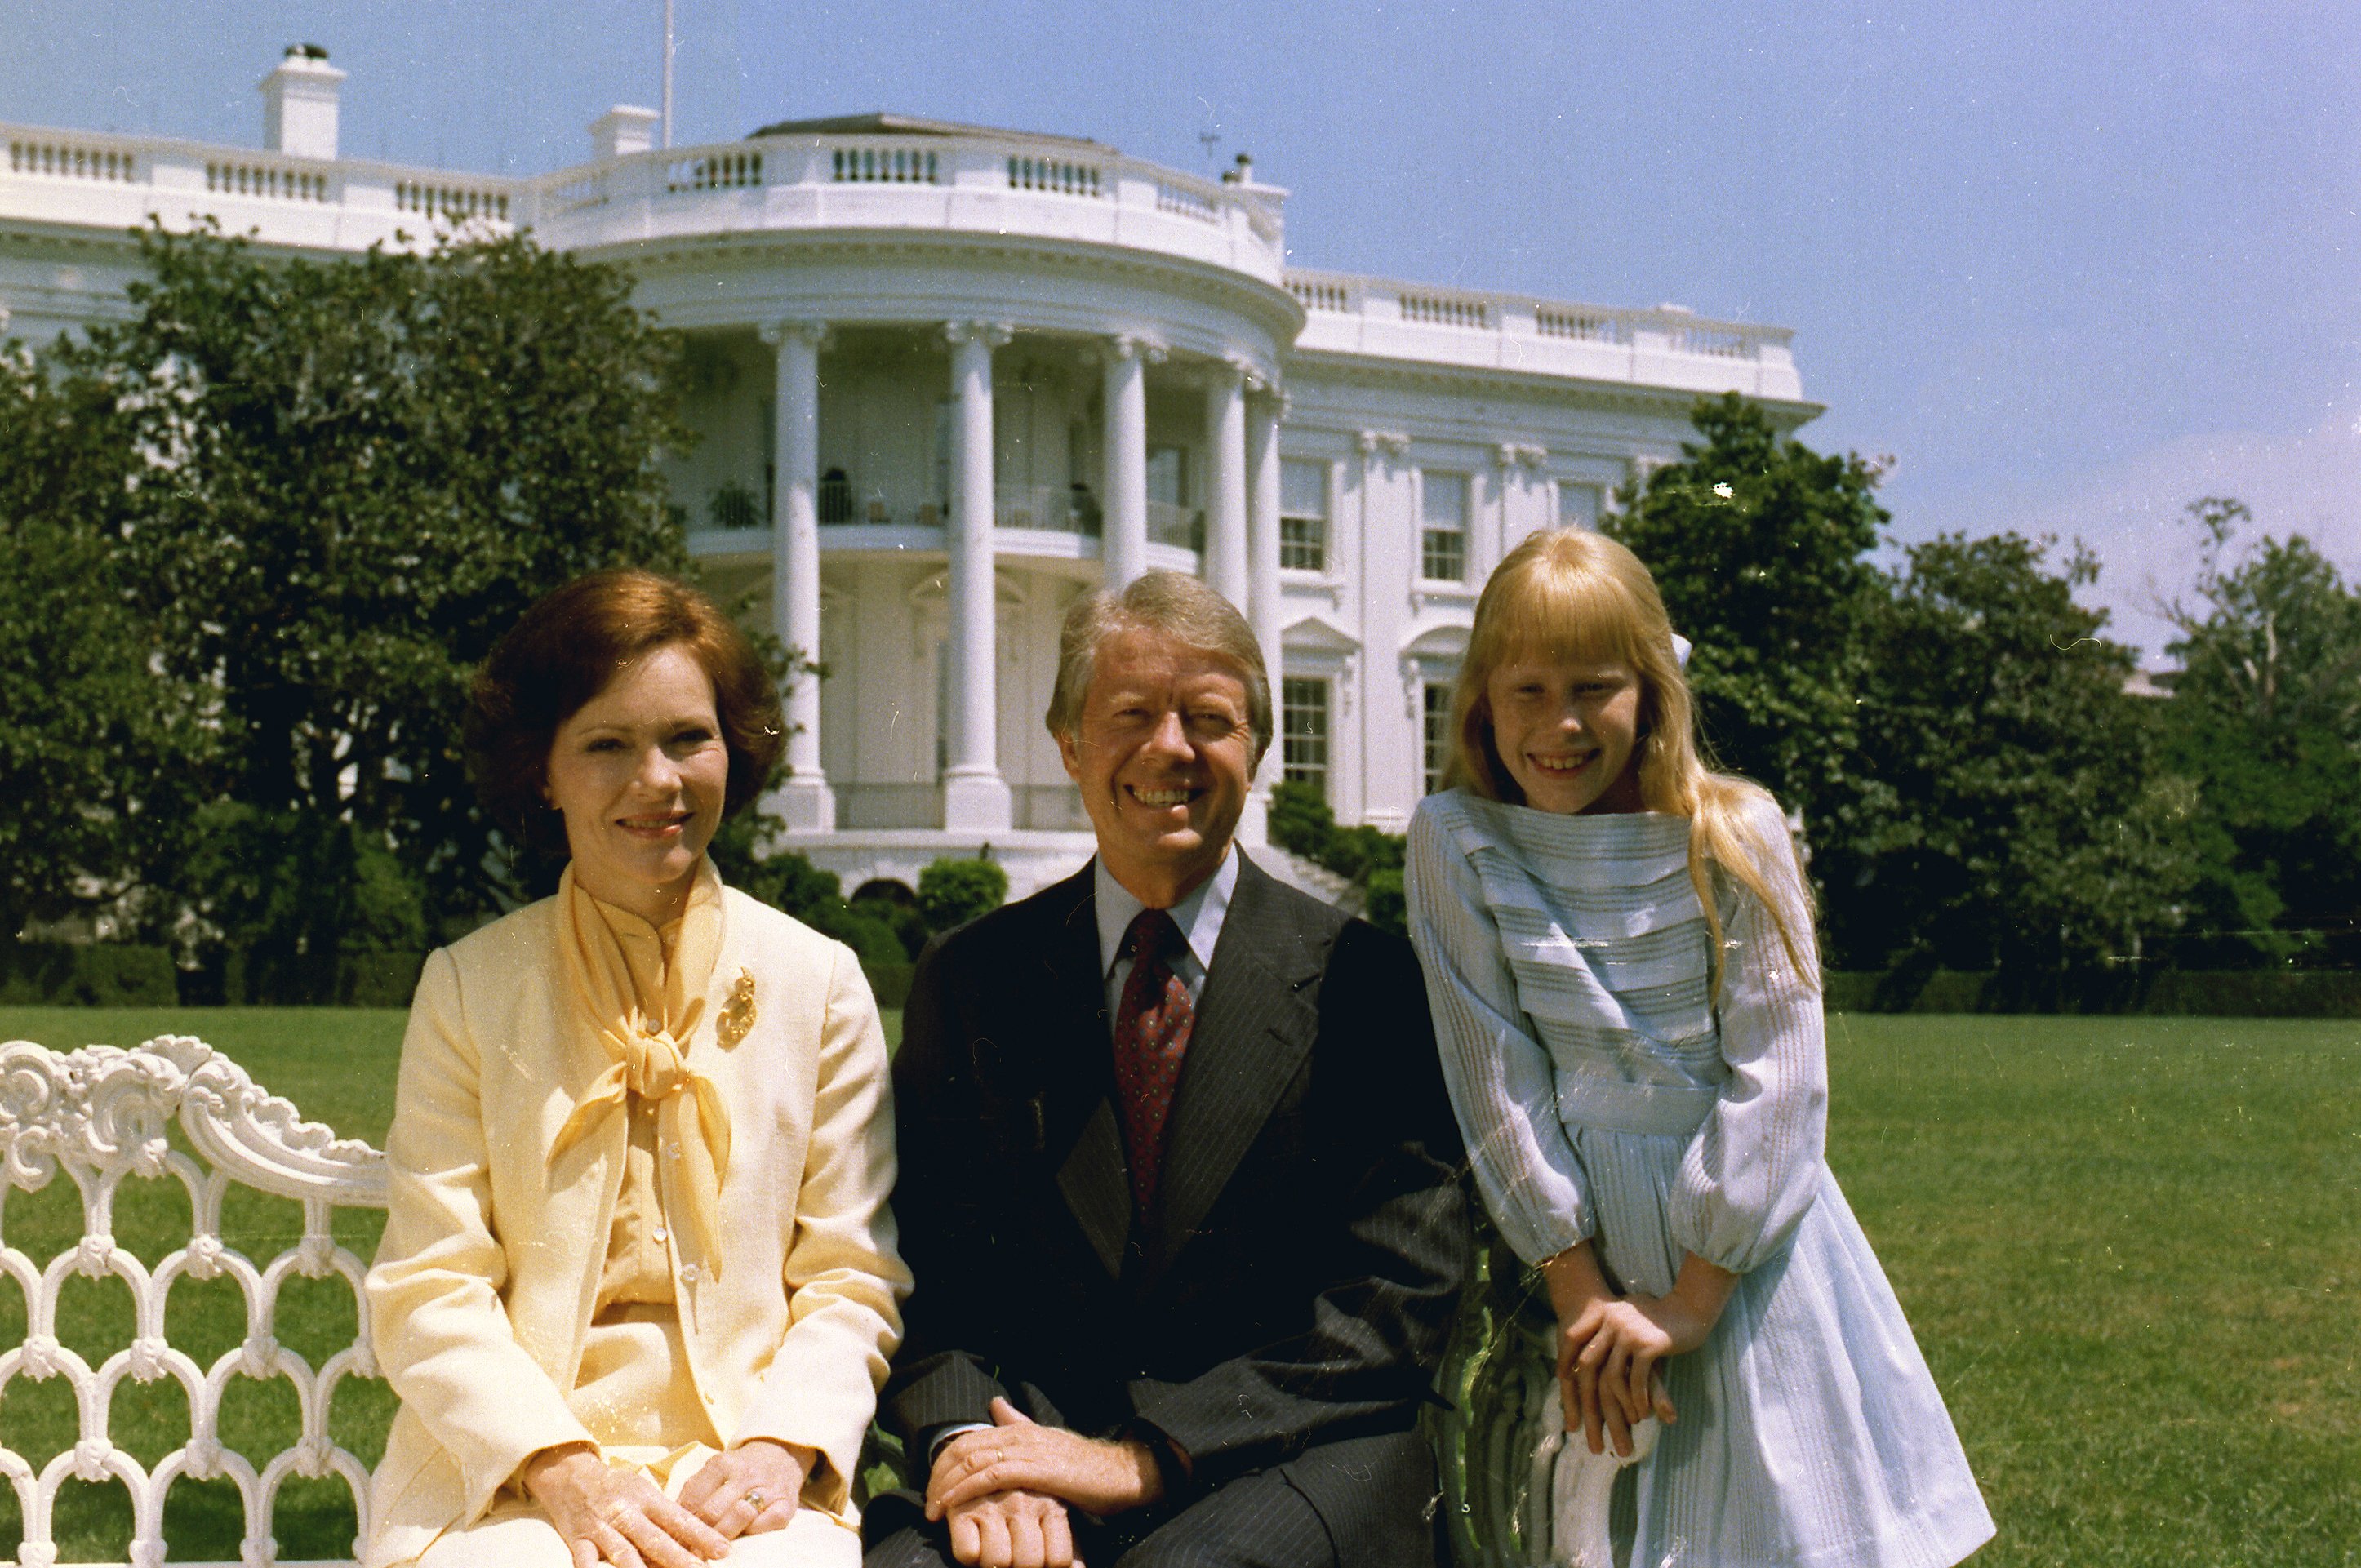 Rosalynn Carter, Jimmy Carter, and their daughter Amy Carter on the south lawn in front of the White House on 24 July 1977 in Washington D.C. ┃Source: Getty Images